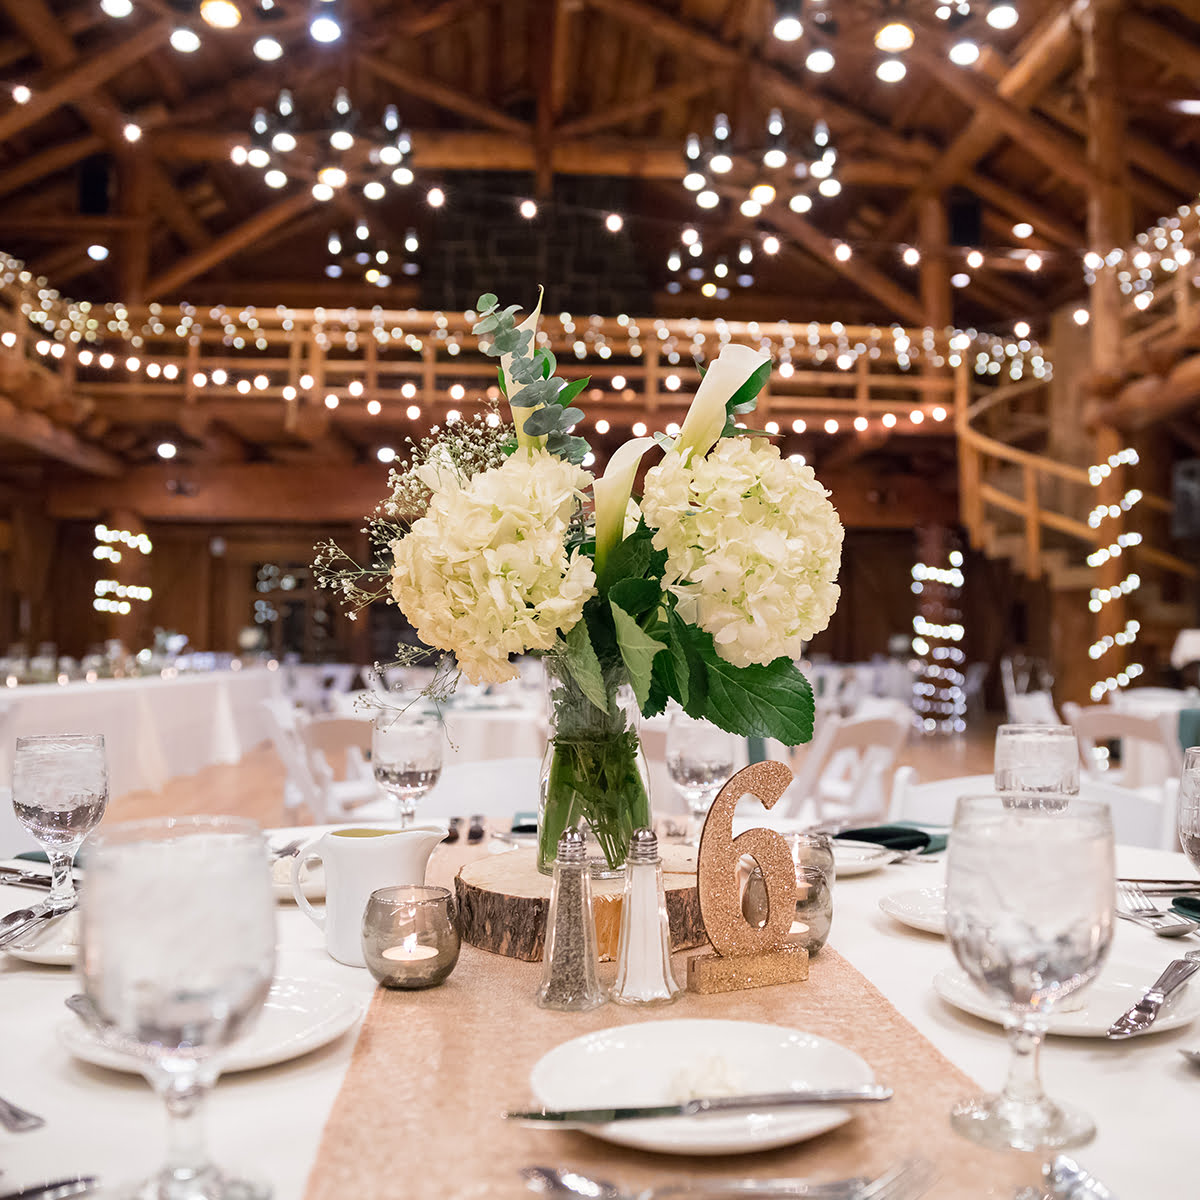 Featured image for “What’s The Difference Between A Venue Coordinator & A Wedding Planner?”